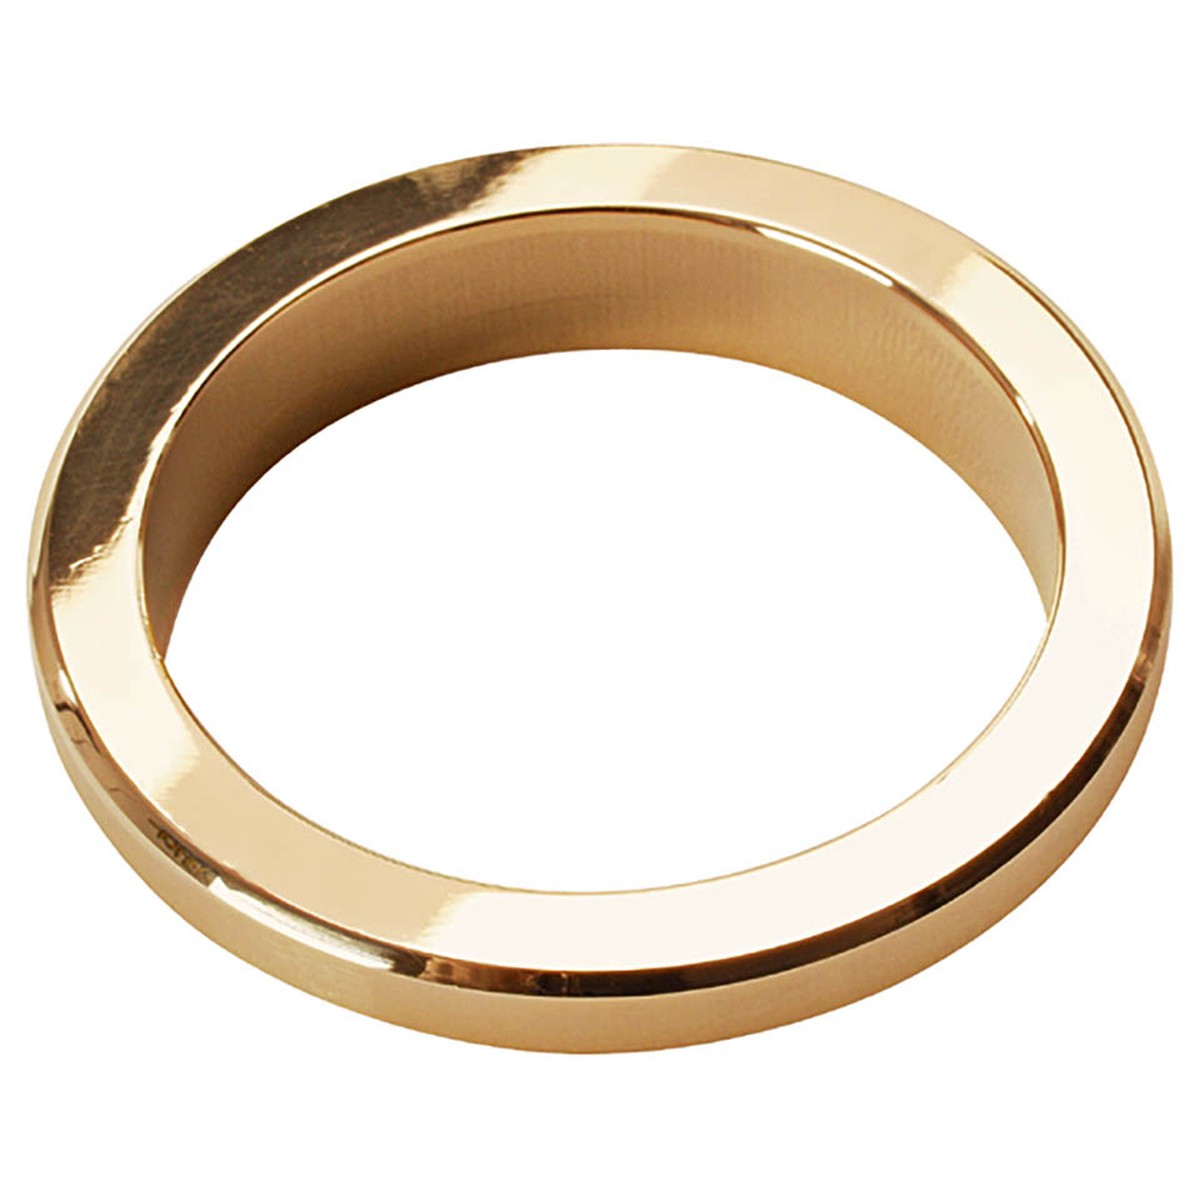 Barlow Tyrie Parasol Parasol Hole Reducer Ring 61mm - brass  